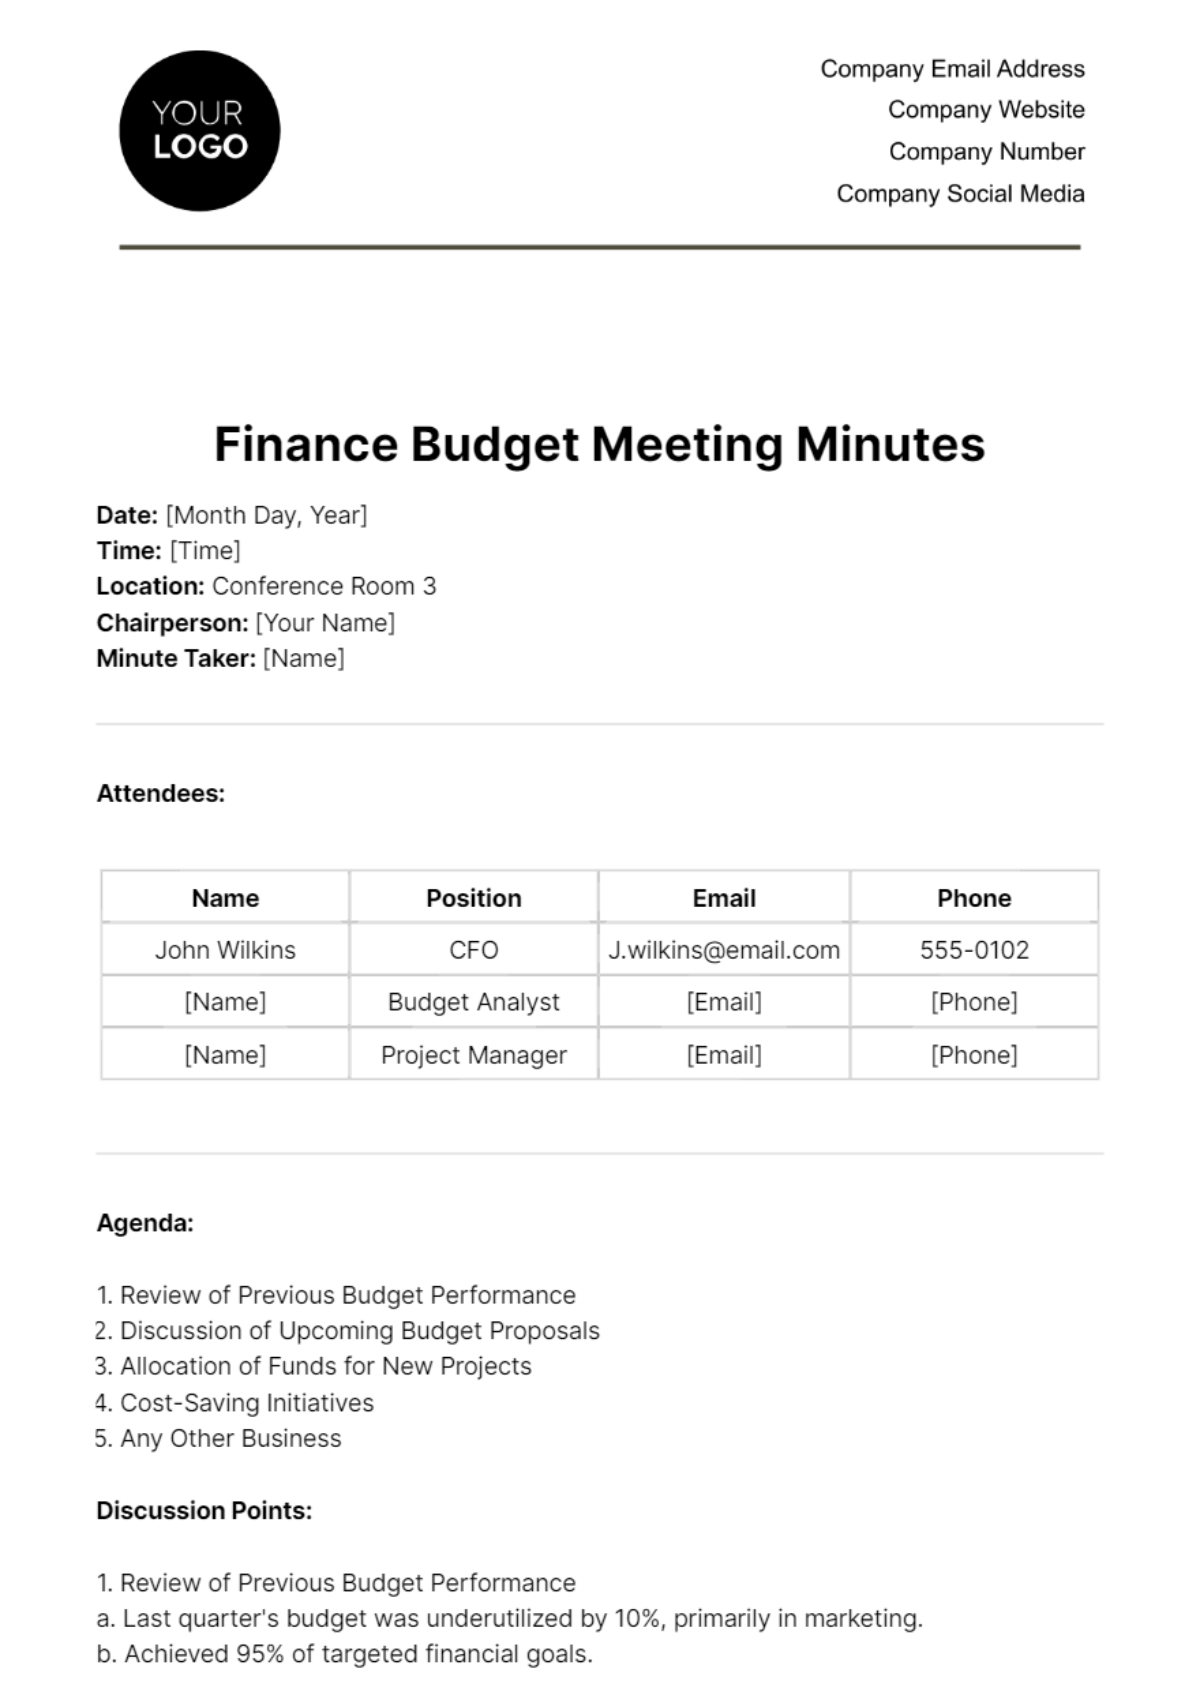 Free Finance Budget Meeting Minute Template